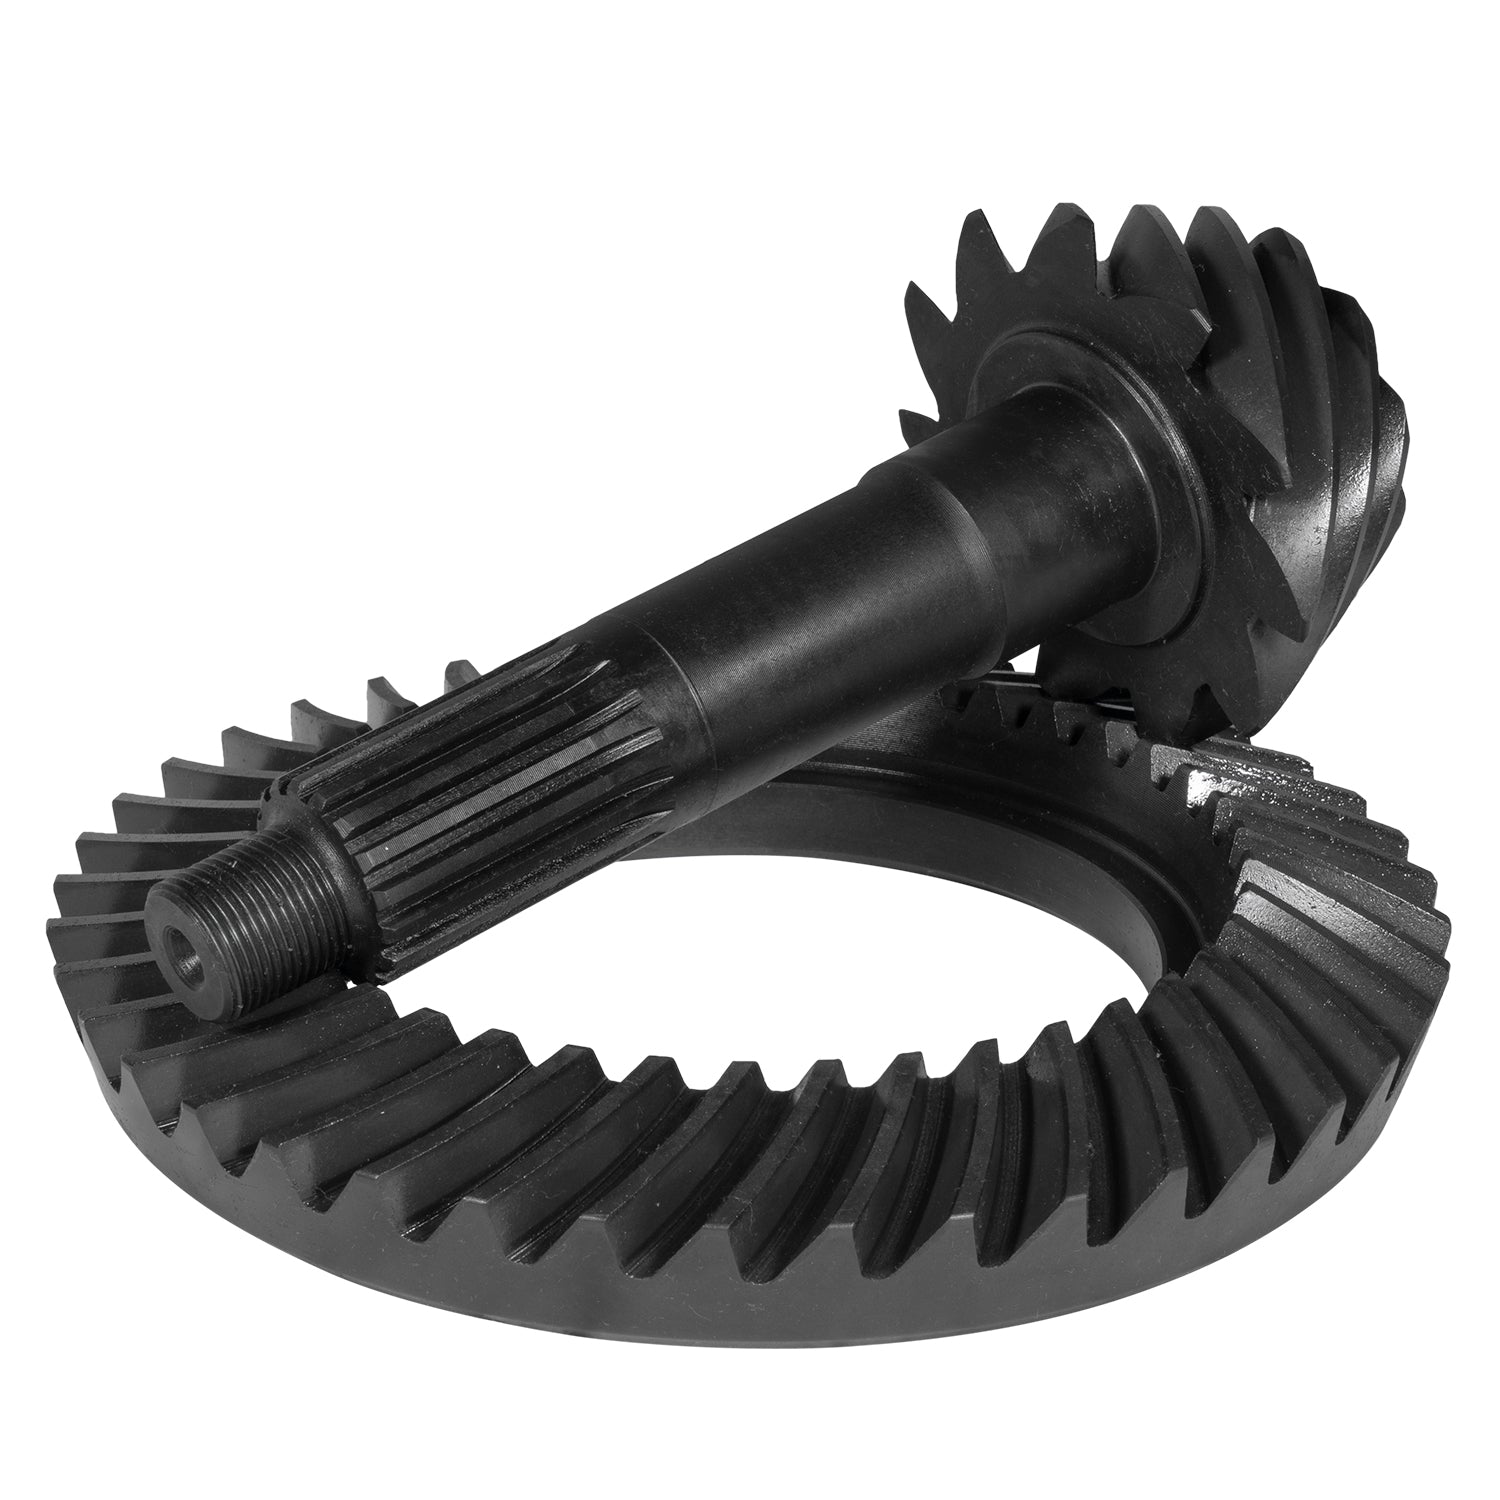 Yukon Gear Chevrolet Differential Ring and Pinion Kit - Rear YGK2372